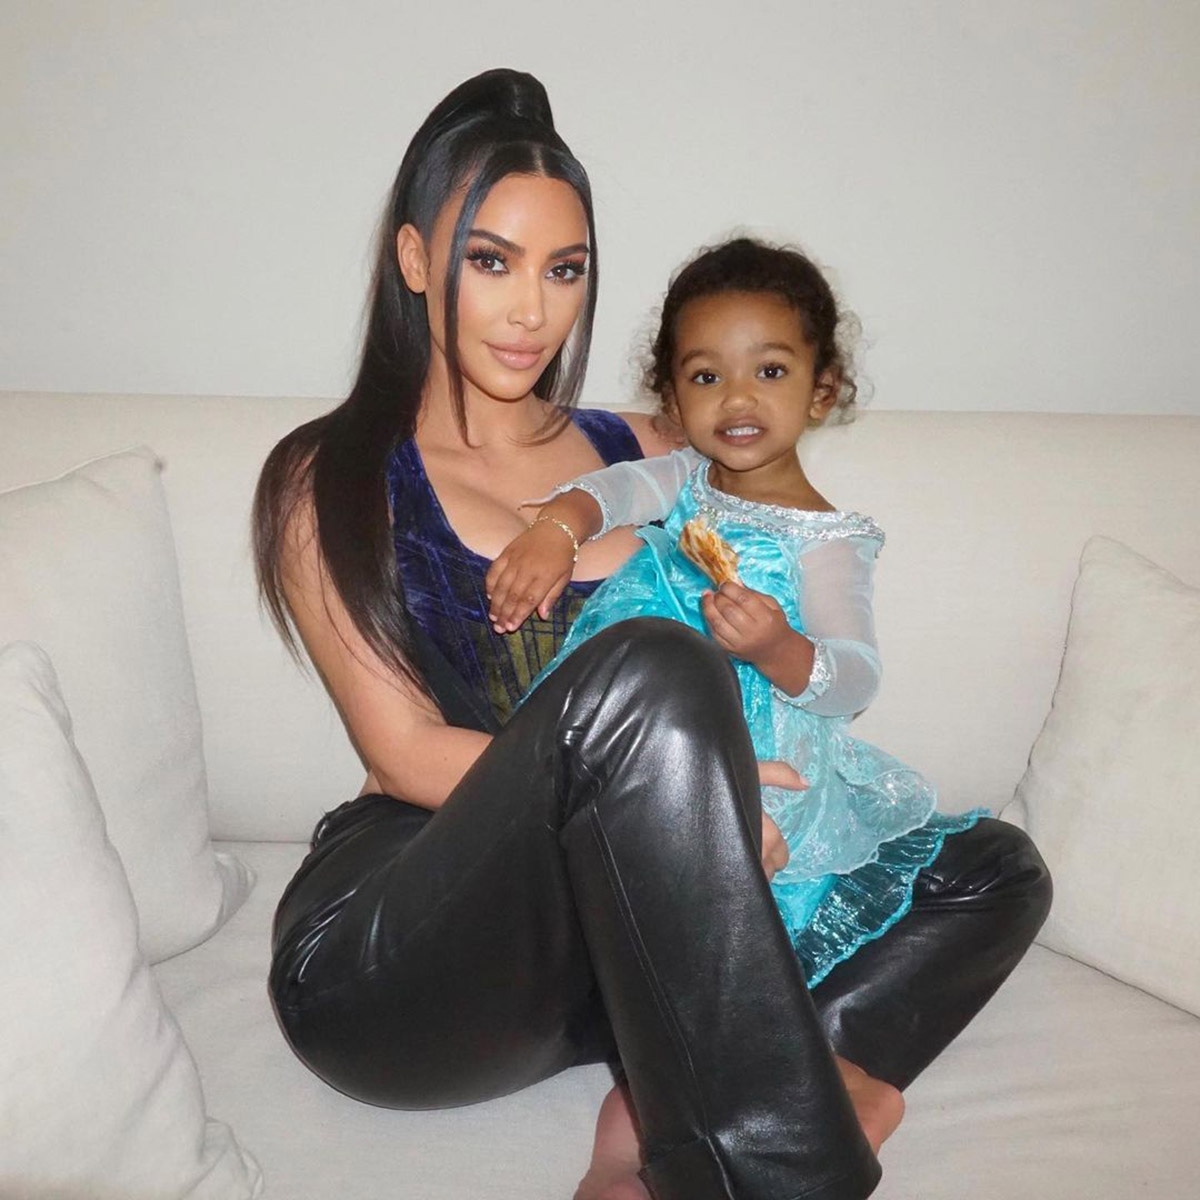 likhoa chicago west hilariously calls out kim kardashians cooking in mothers day card 6533a0c01588f Chicago West Hilariously Calls Out Kim Kardashian’s Cooking In Mother’s Day Card